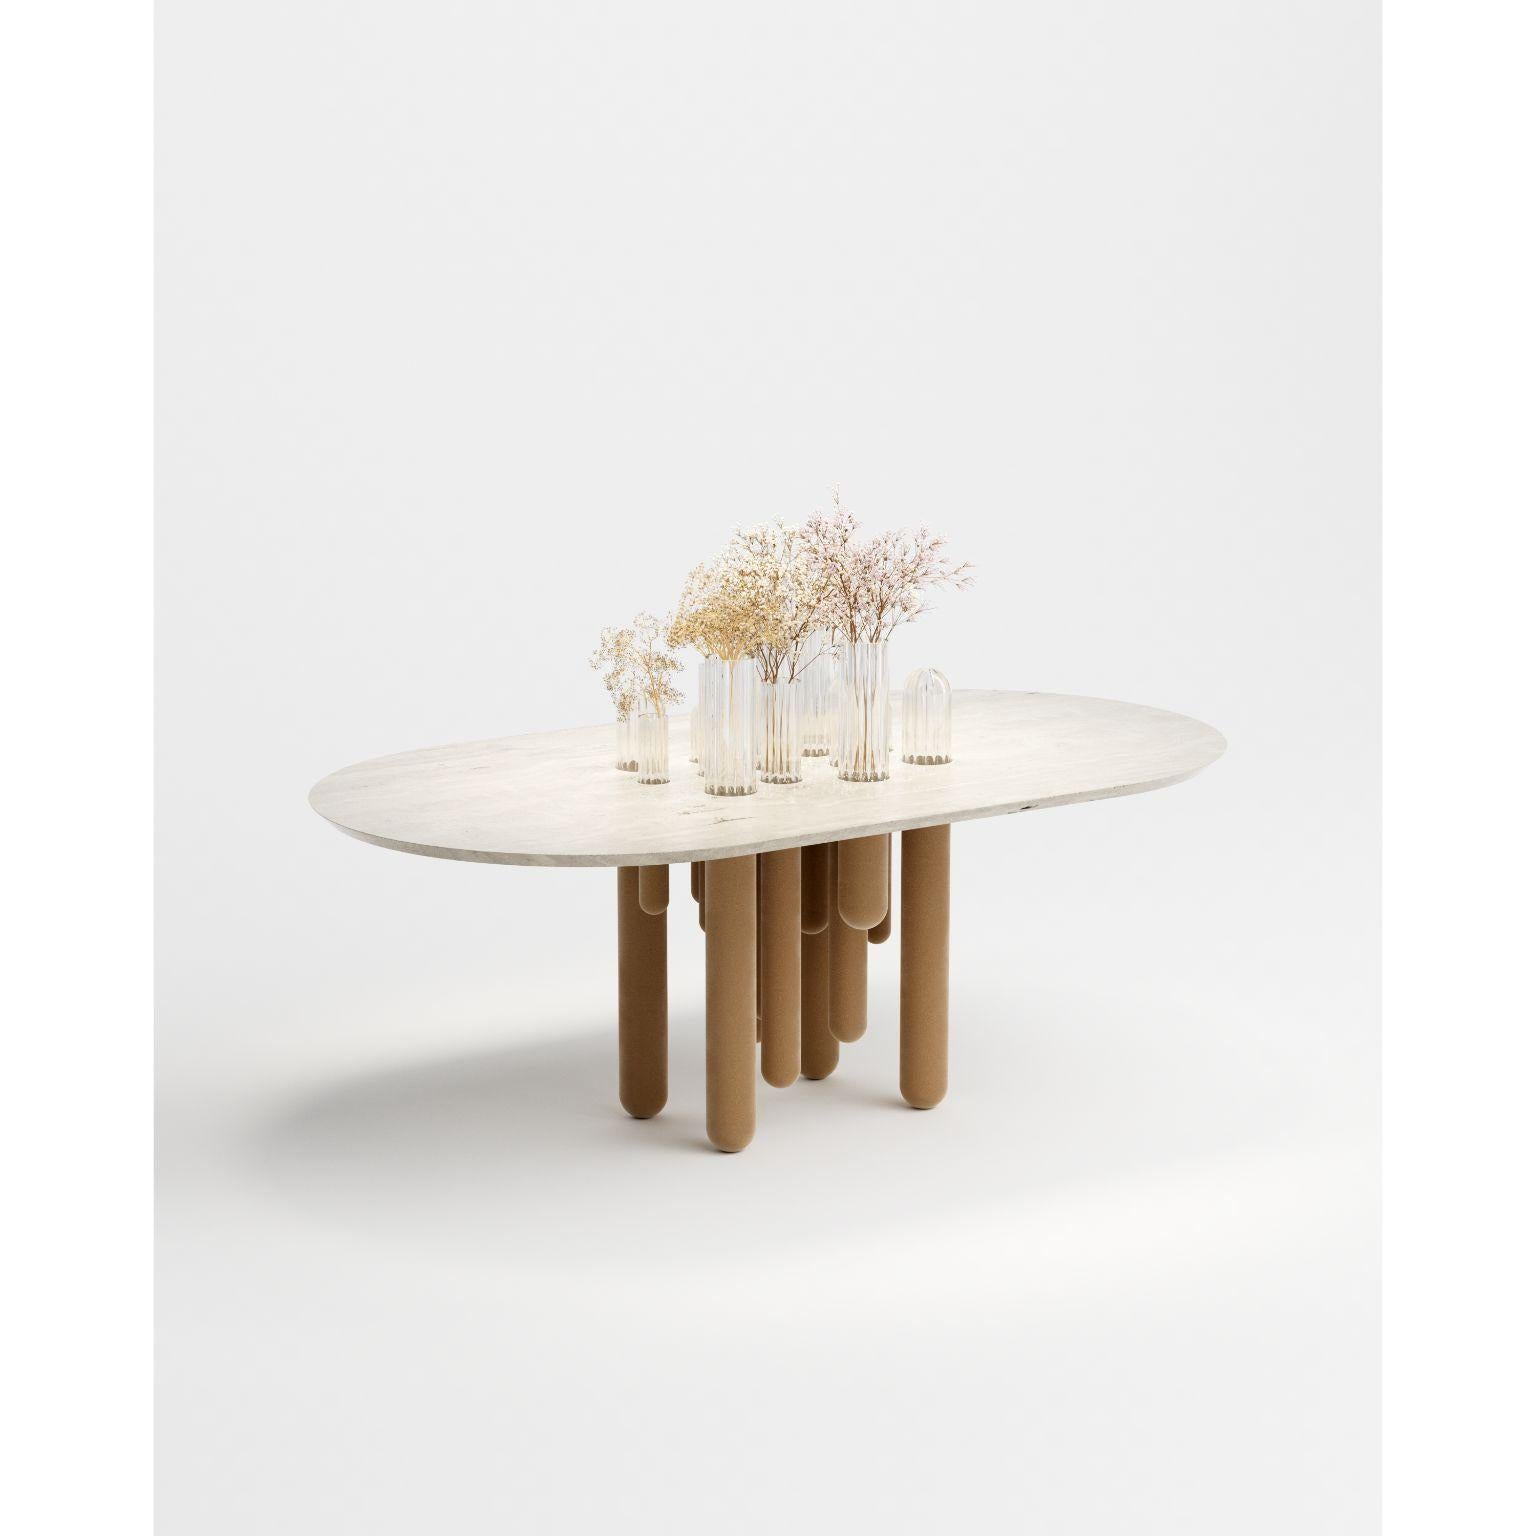 Other Cactus Velvet Oval Table by Mickael Koska  For Sale